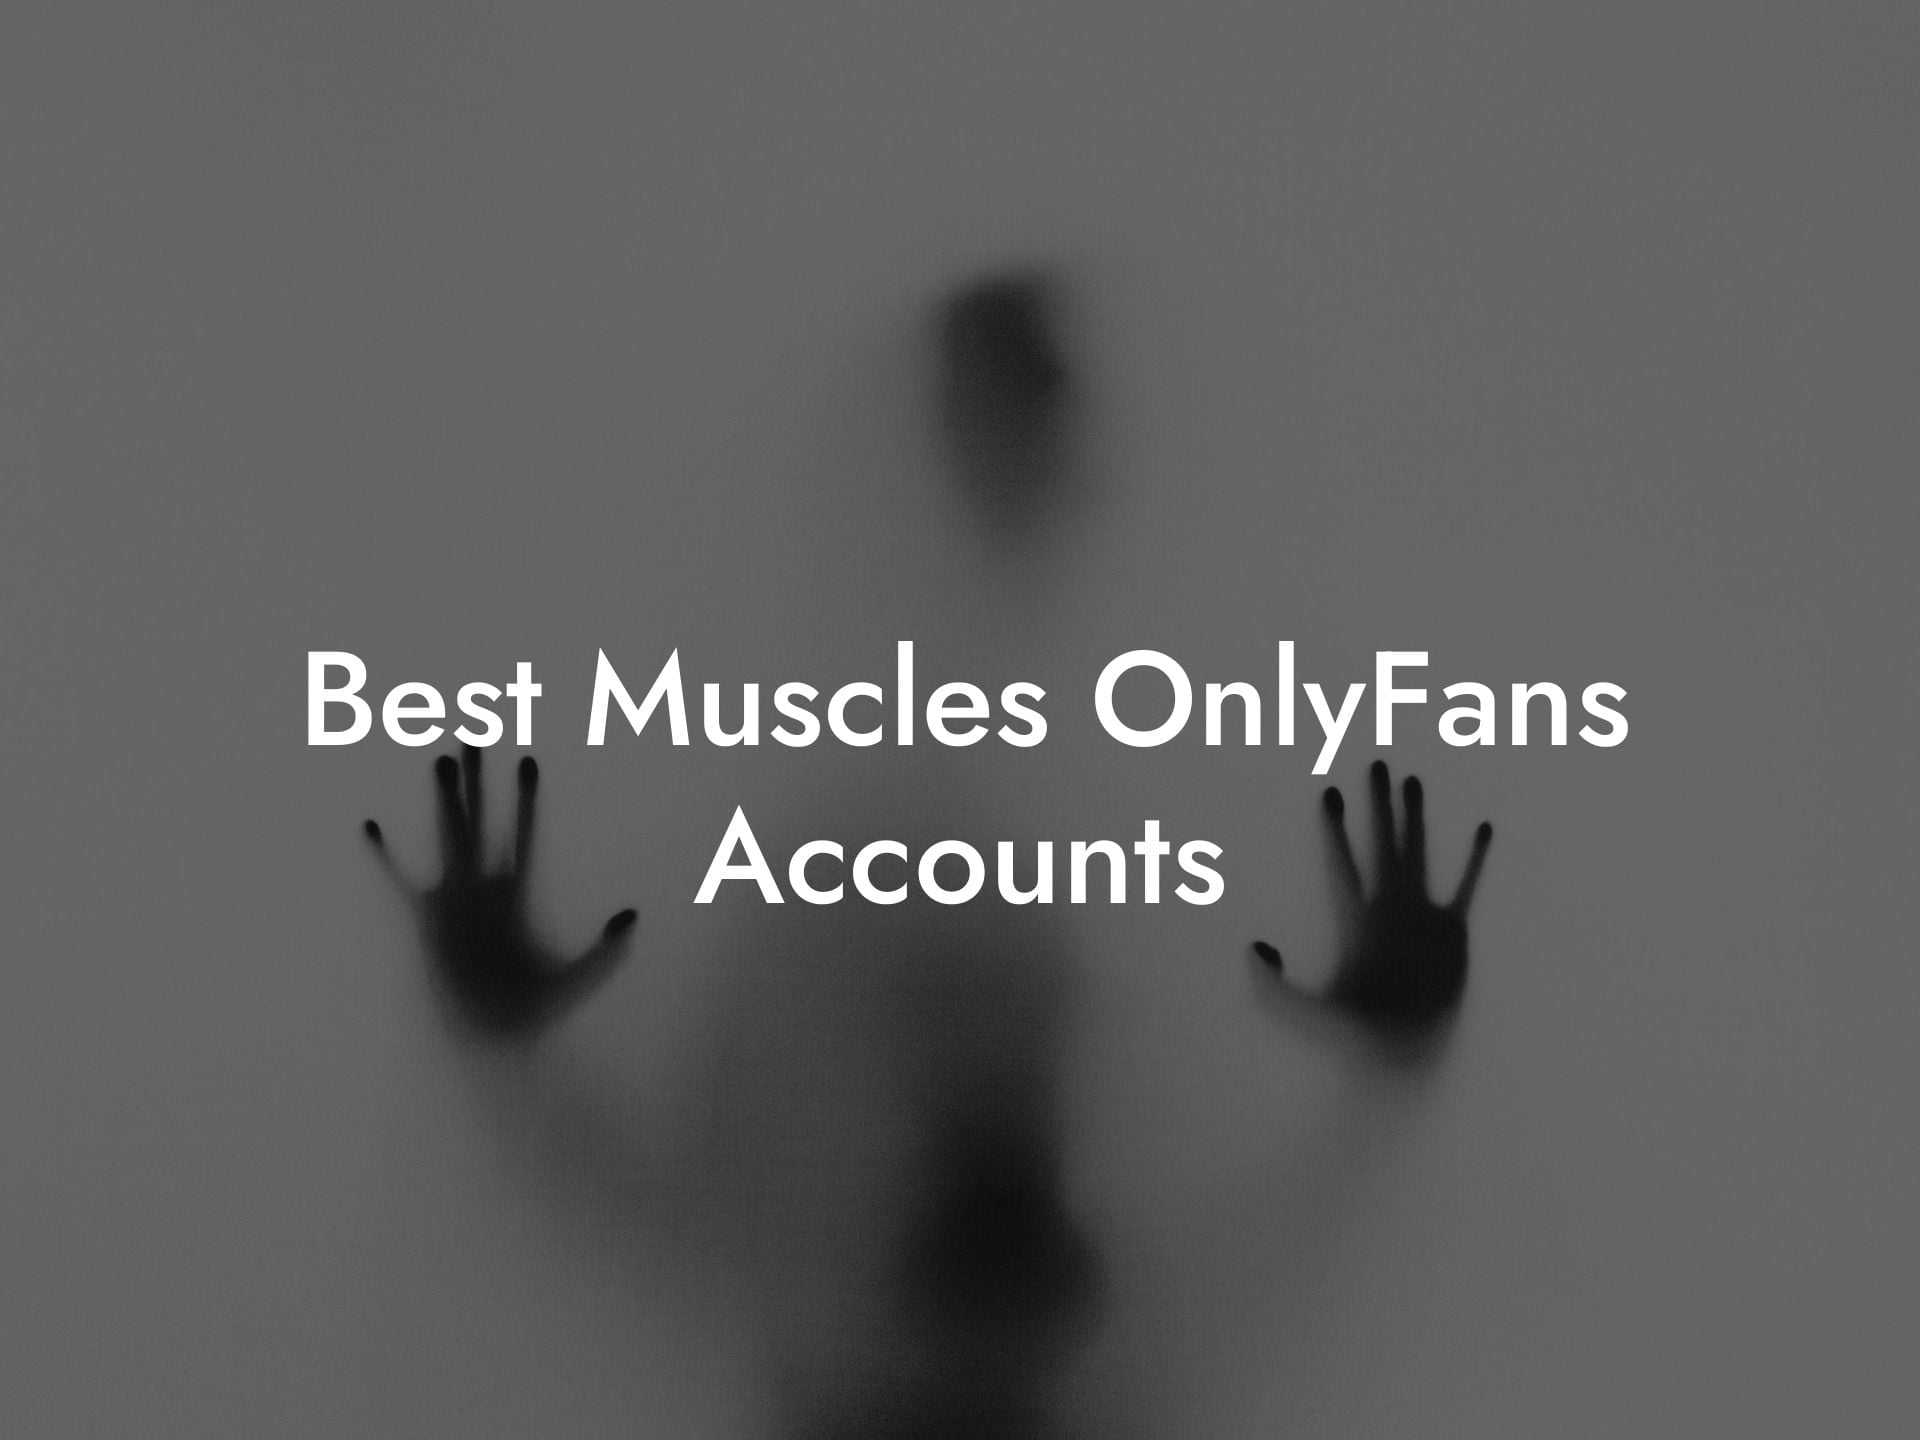 Best Muscles OnlyFans Accounts